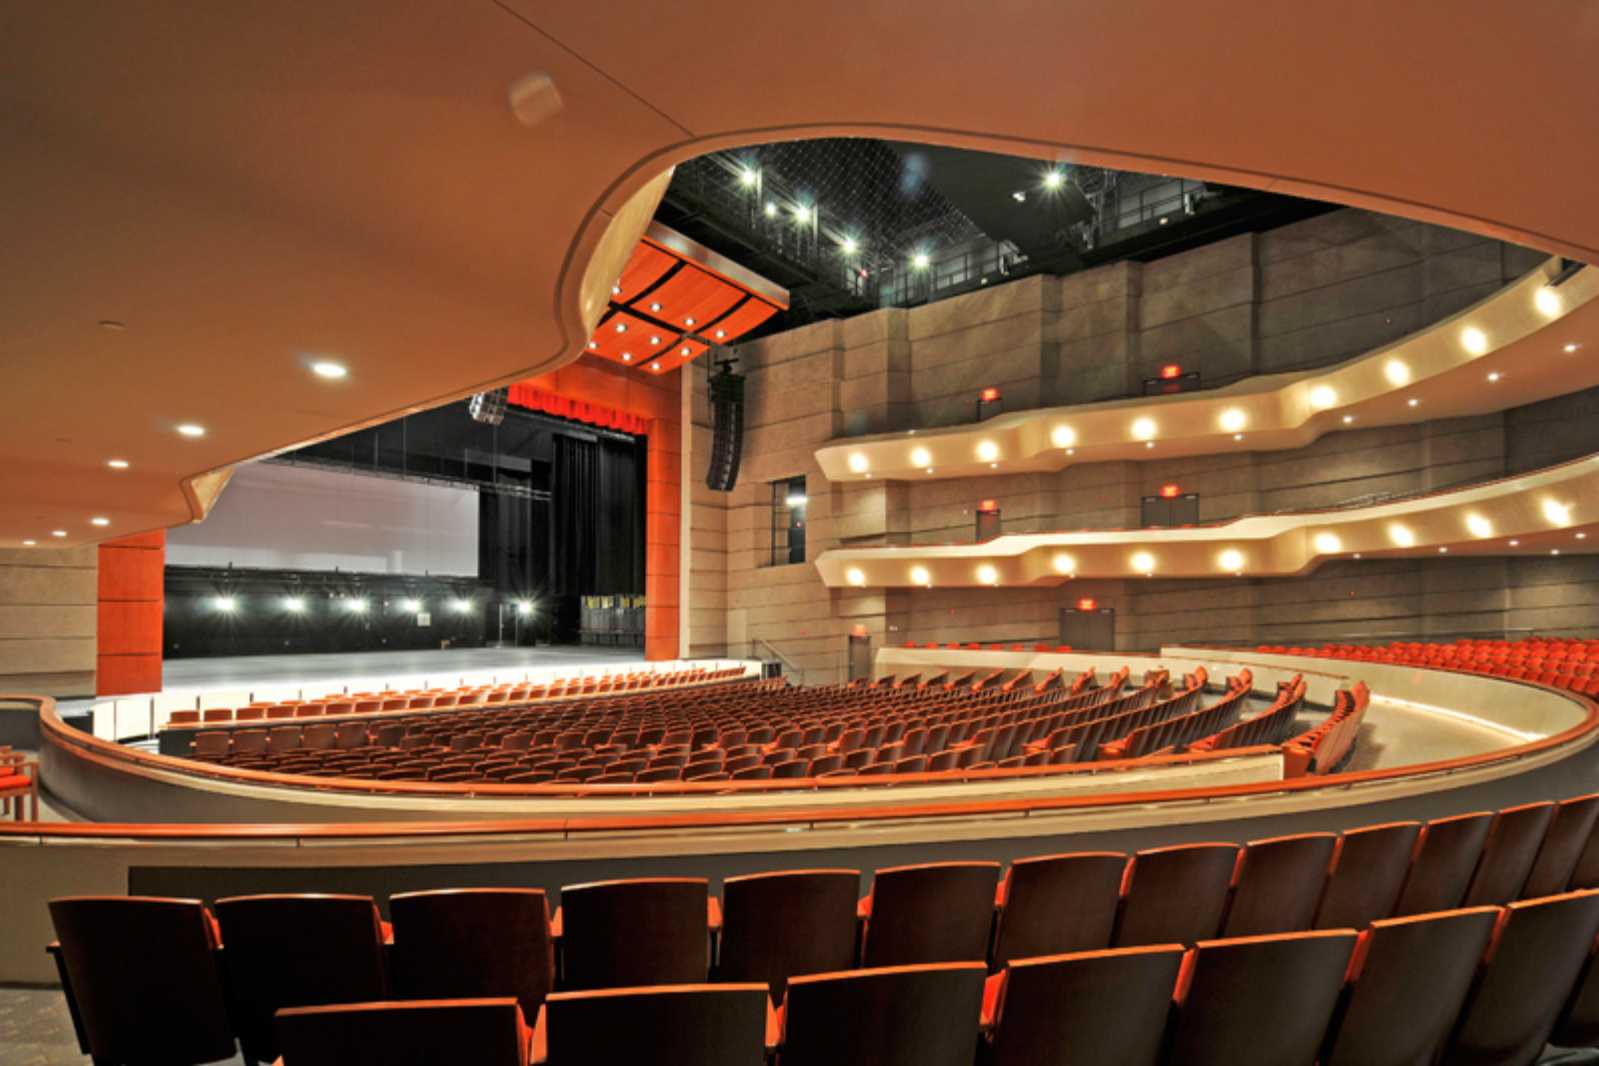 Wagner Noel Performing Arts Center Seating Chart